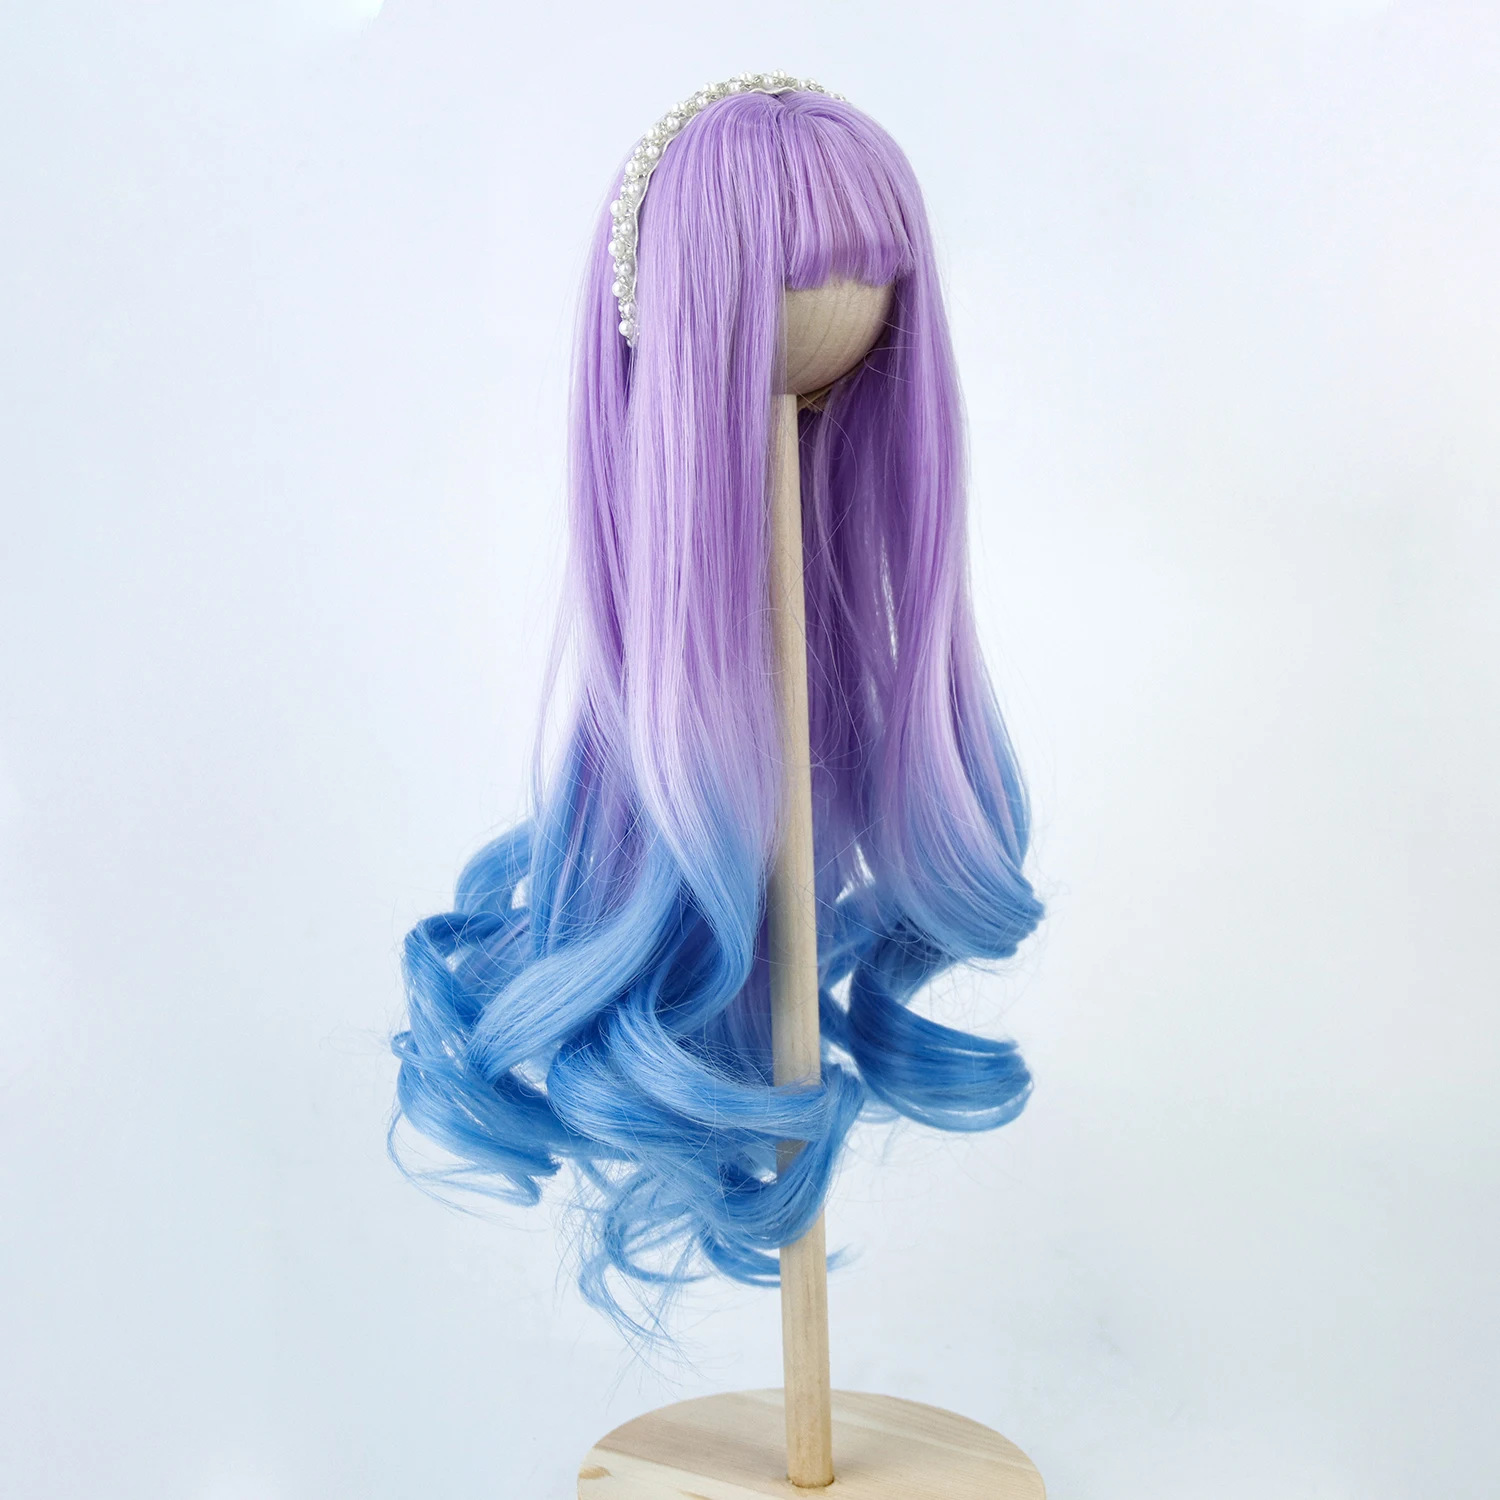 8-9 Inch Head Aidolla 1/3 BJD Doll Wig Long Bangs Purple Blue Hair High-temperature Wire Wig DIY Doll Accessories For Girl Gift zaful textured underwire v wire bikini top xs purple